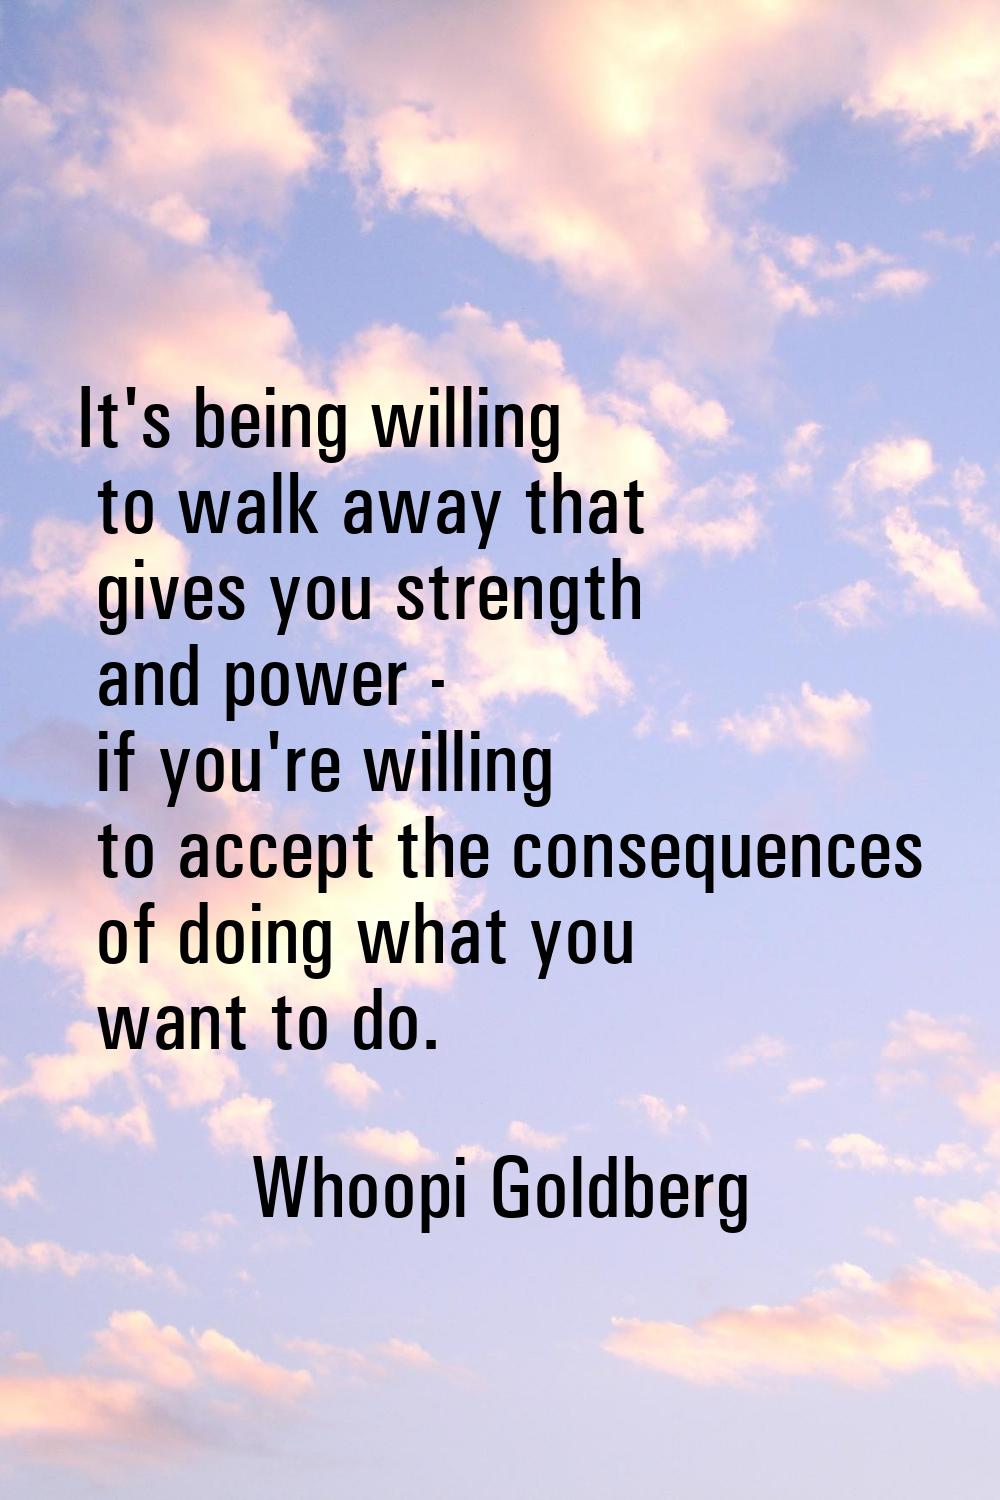 It's being willing to walk away that gives you strength and power - if you're willing to accept the